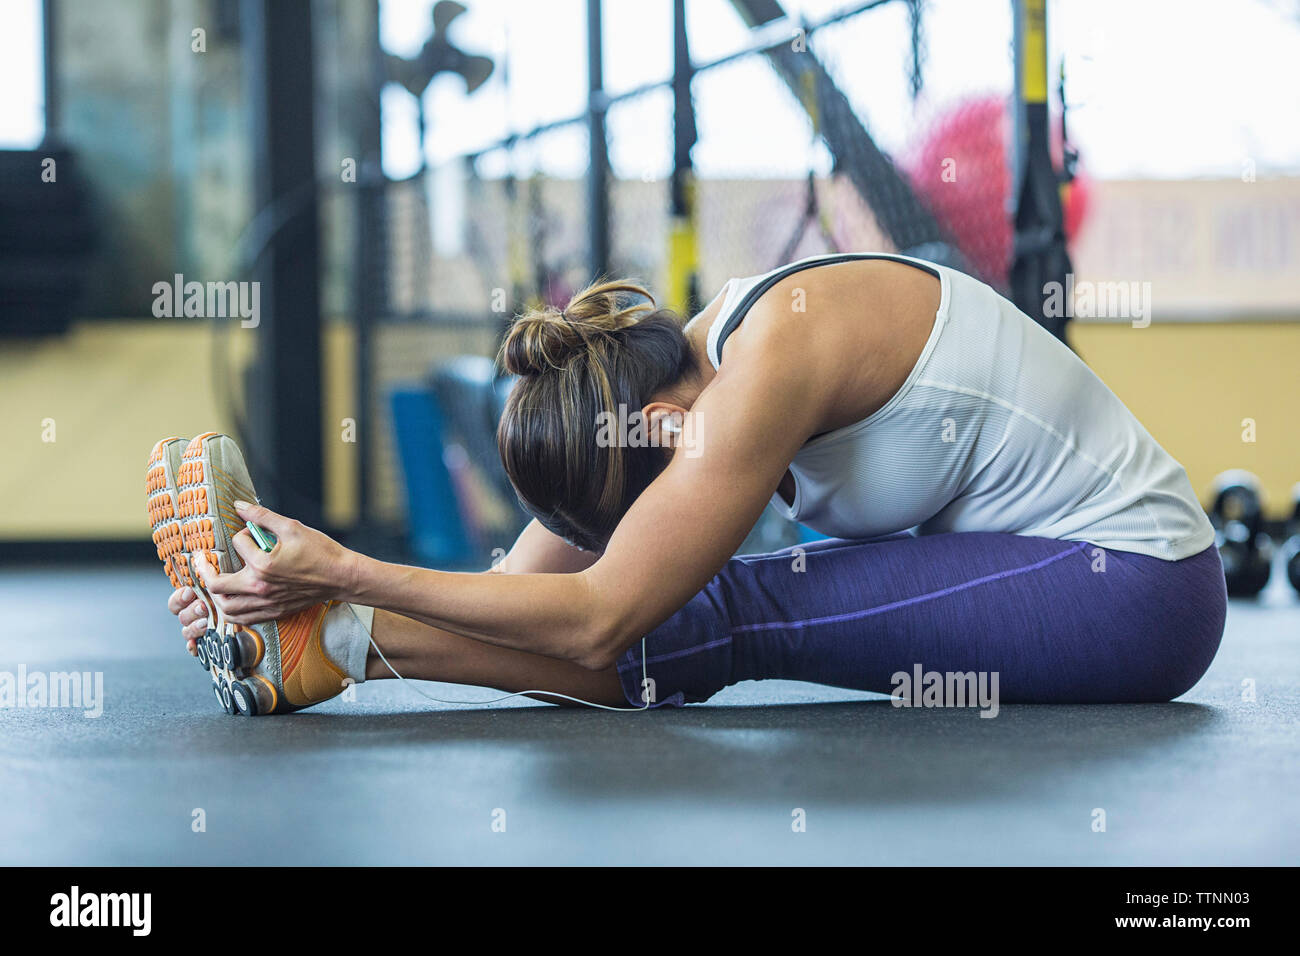 Woman practicing seated forward bend pose in gym Stock Photo